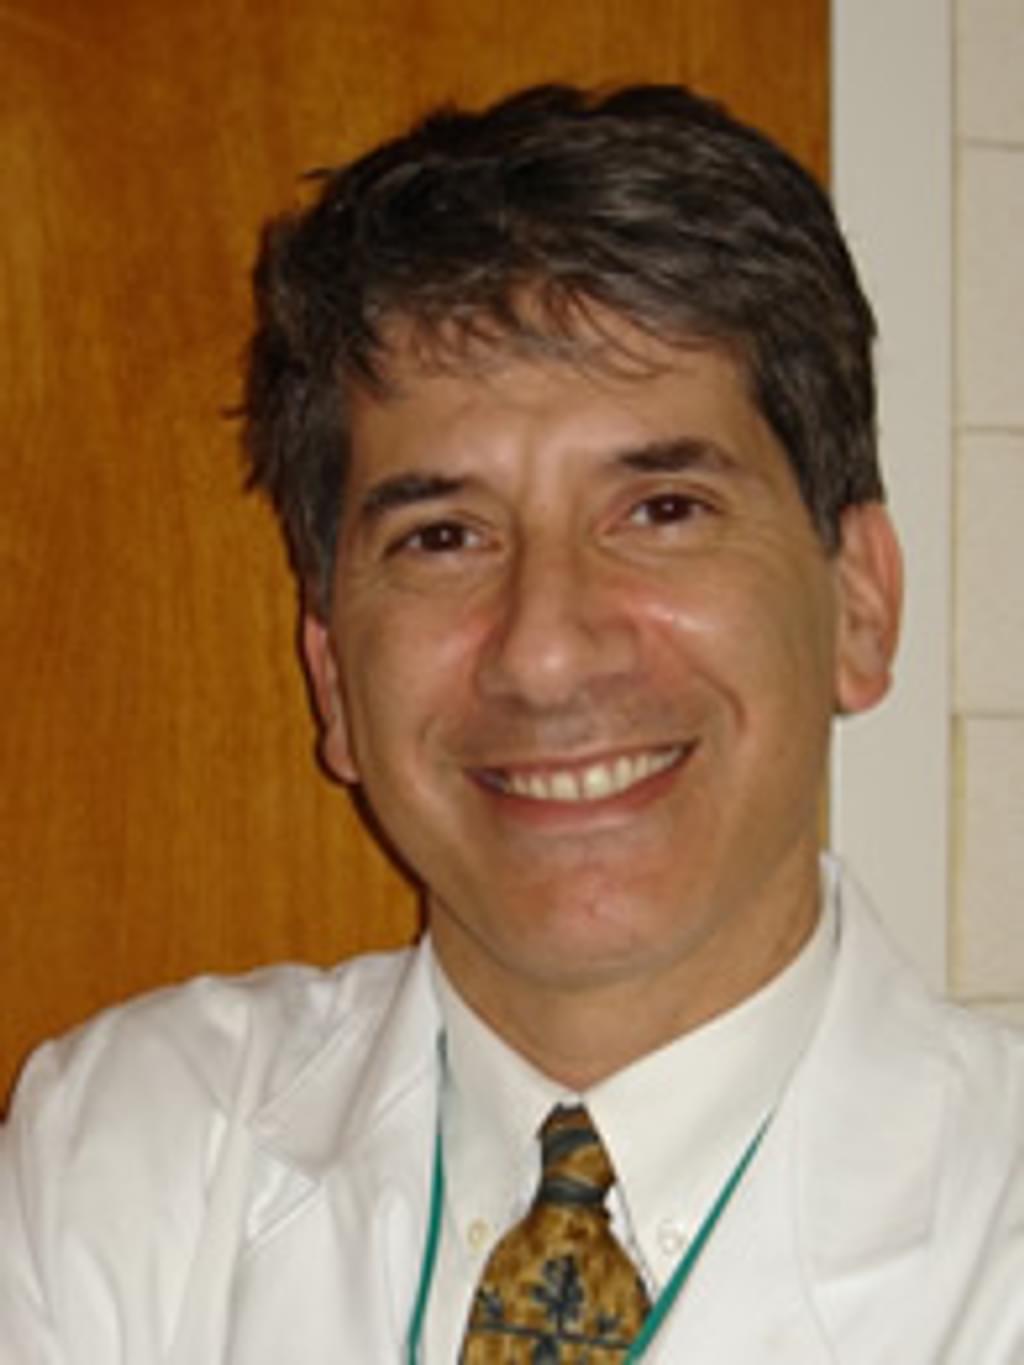 Anesthesiologist Dr. Joel Zivot on What Prisoner Autopsies Tell Us About Lethal Injection